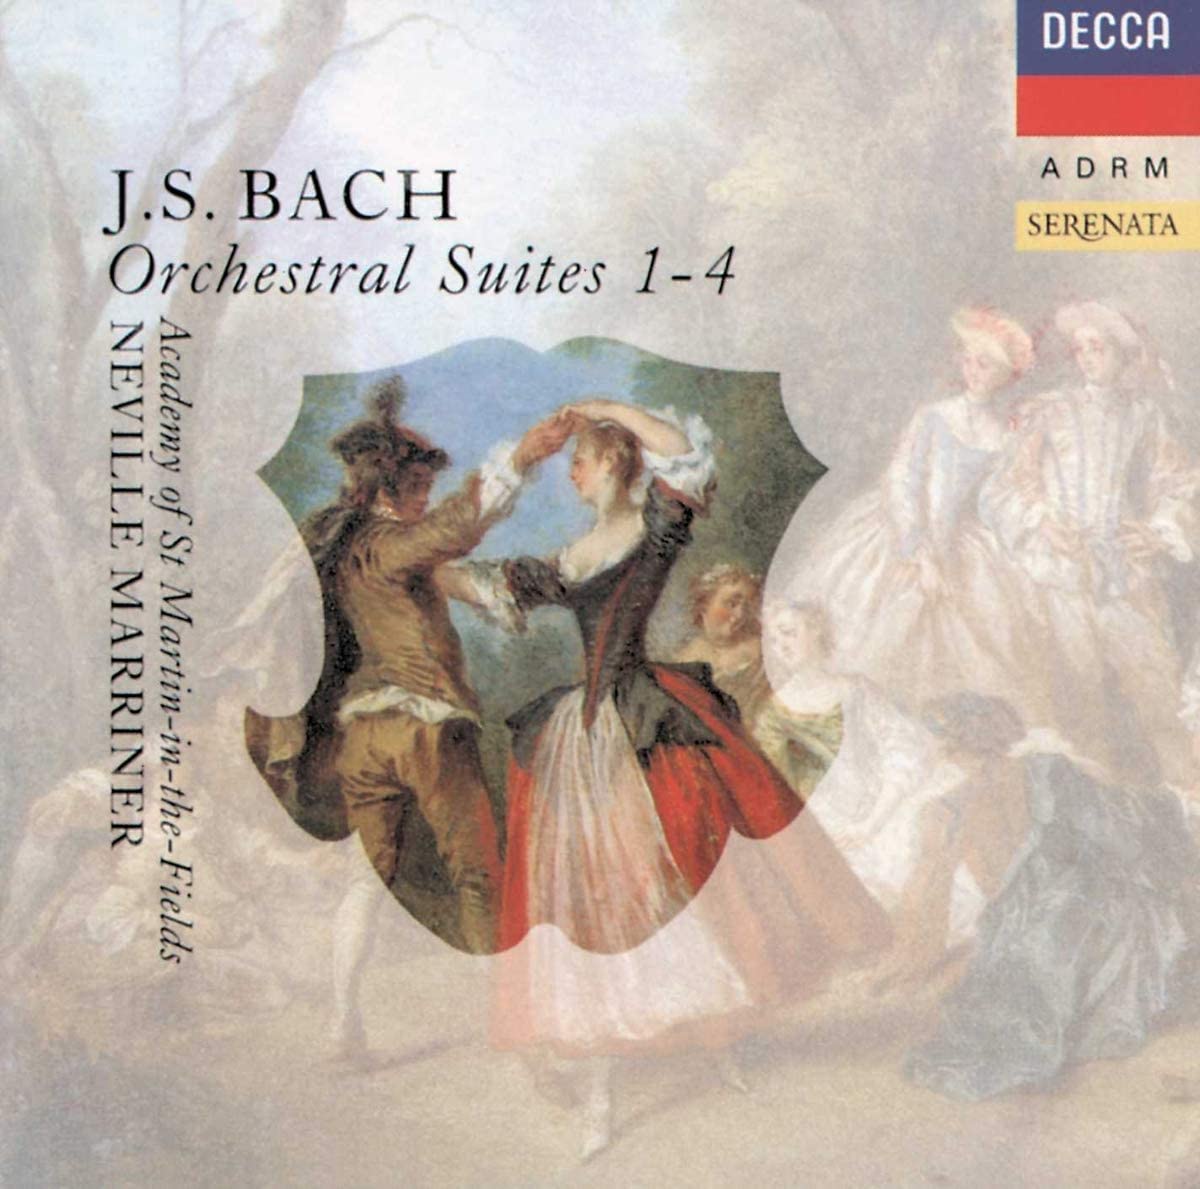 J.S. Bach - Academy Of St Martin-in-the-Fields, Neville Marriner – Orchestral Suites 1-4 - USED CD